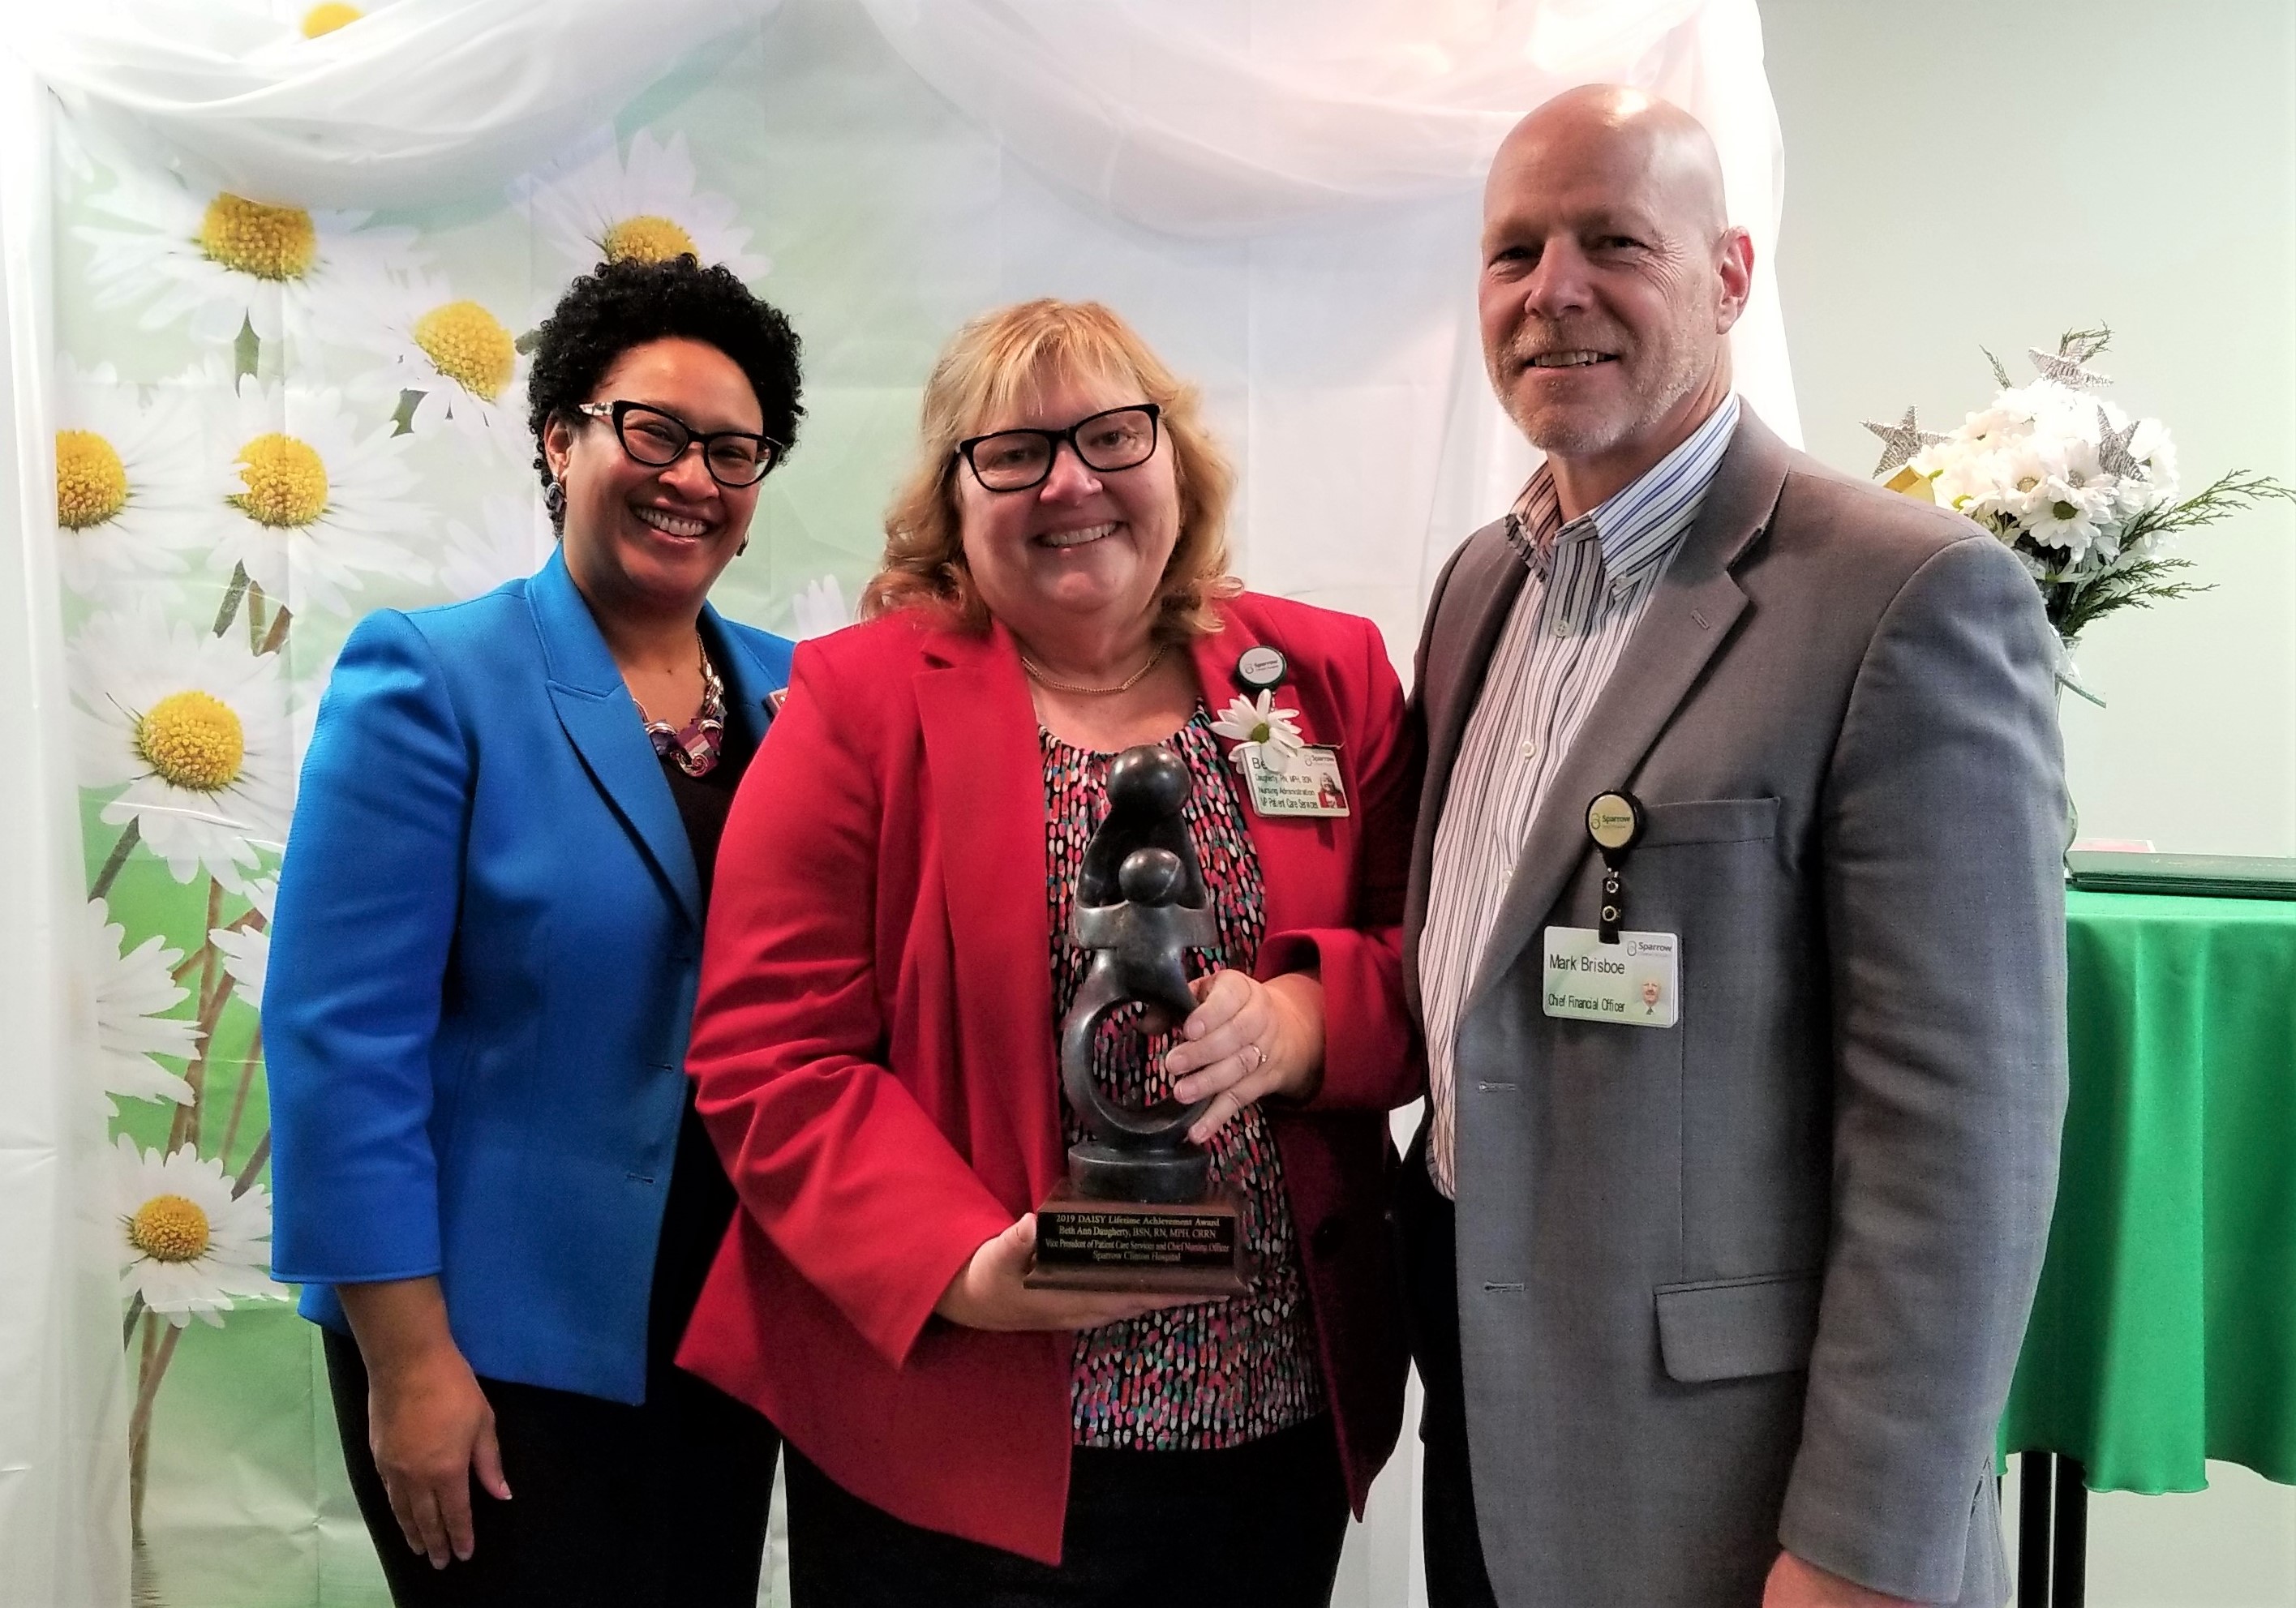 Kira Carter-Robertson, (left) Sparrow Senior Vice President of Affiliate Operations, and Mark Brisboe, (right) Sparrow Chief Financial Officer of Community Hospitals, congratulated Beth Daugherty on her DAISY Lifetime Achievement Award.